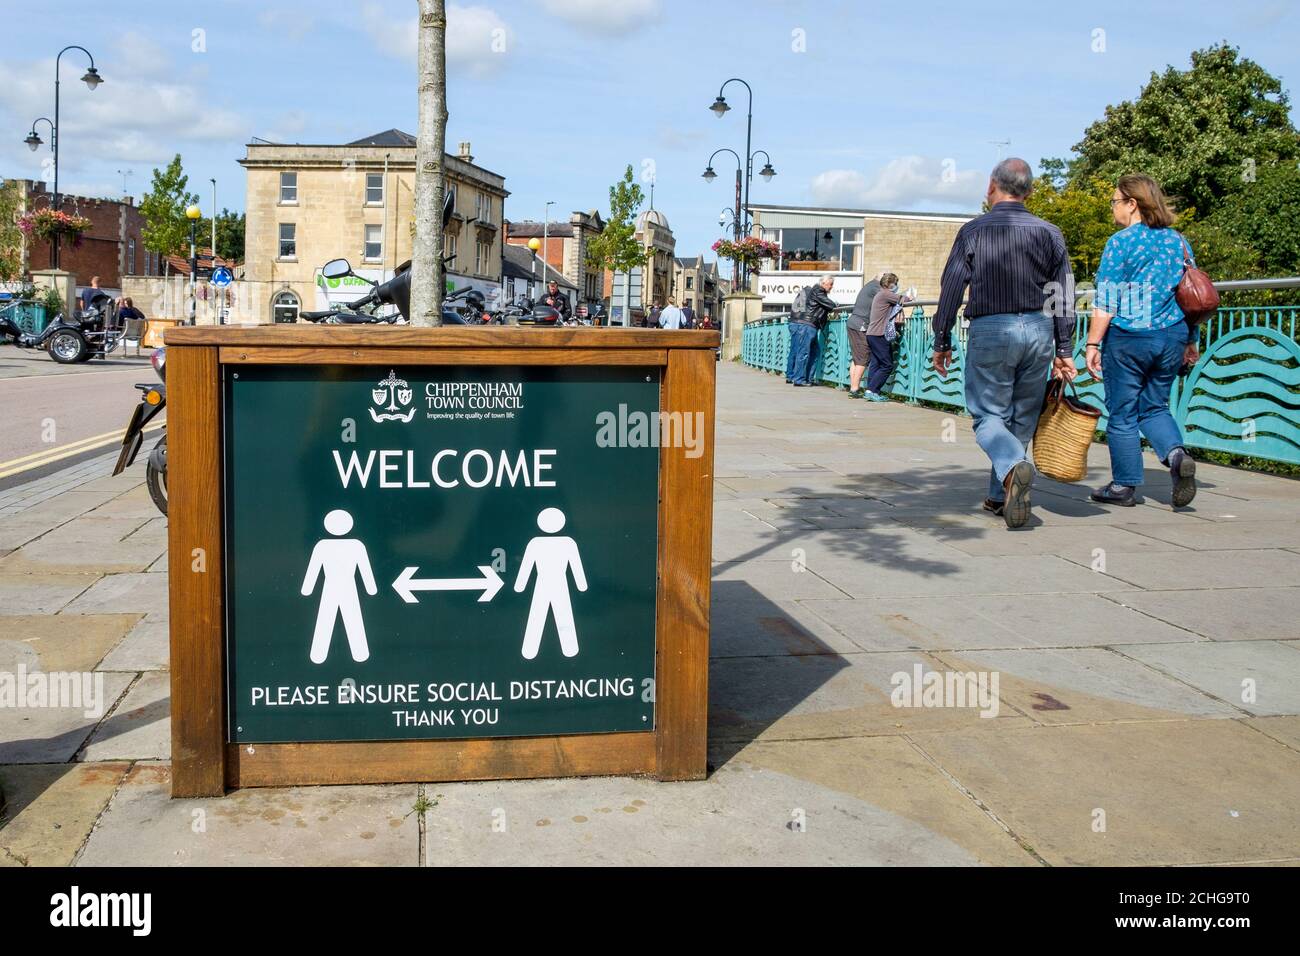 Social distancing signs to remind shoppers to abide by covid 19 social distancing rules are pictured in Chippenham, Wiltshire, UK Stock Photo